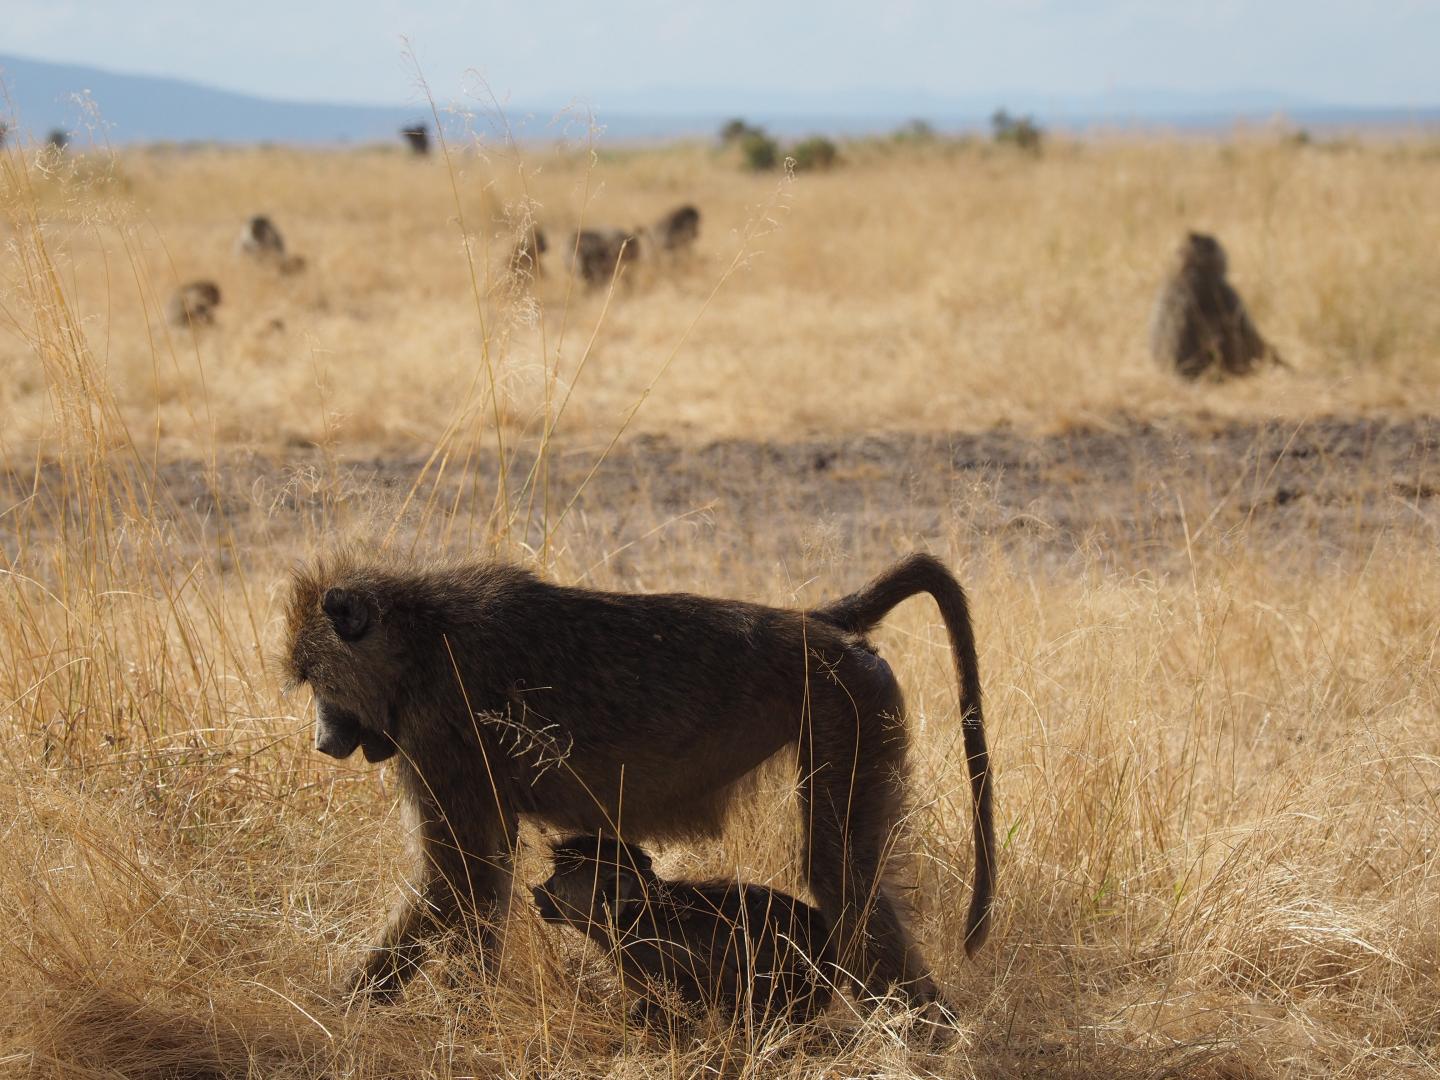 A dominant female baboon